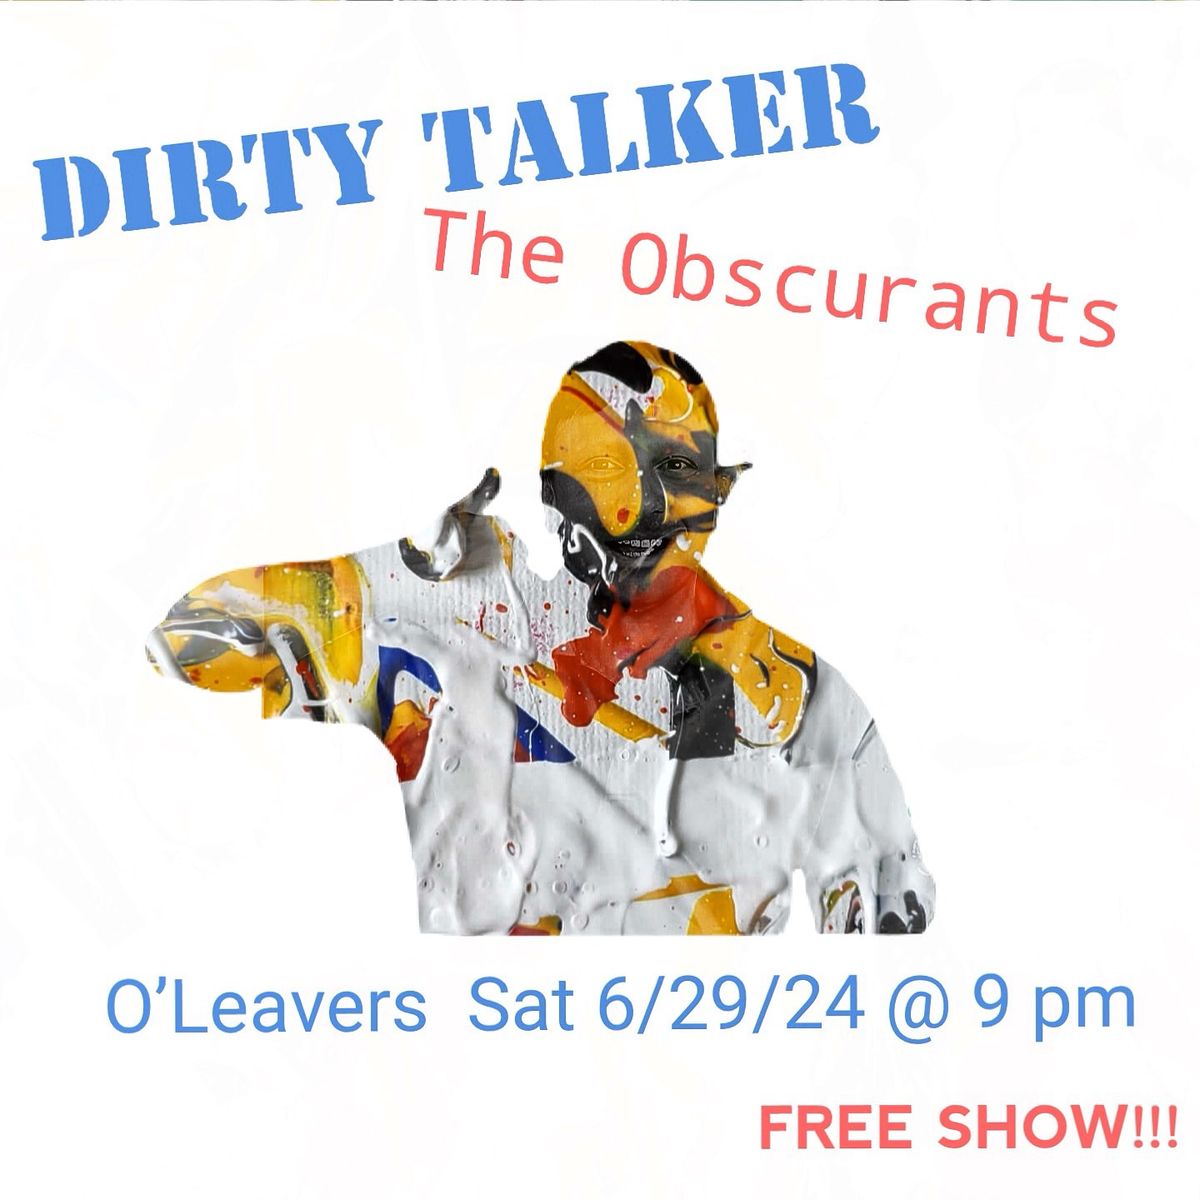 FREE-Dirty Talker with The Obscurants